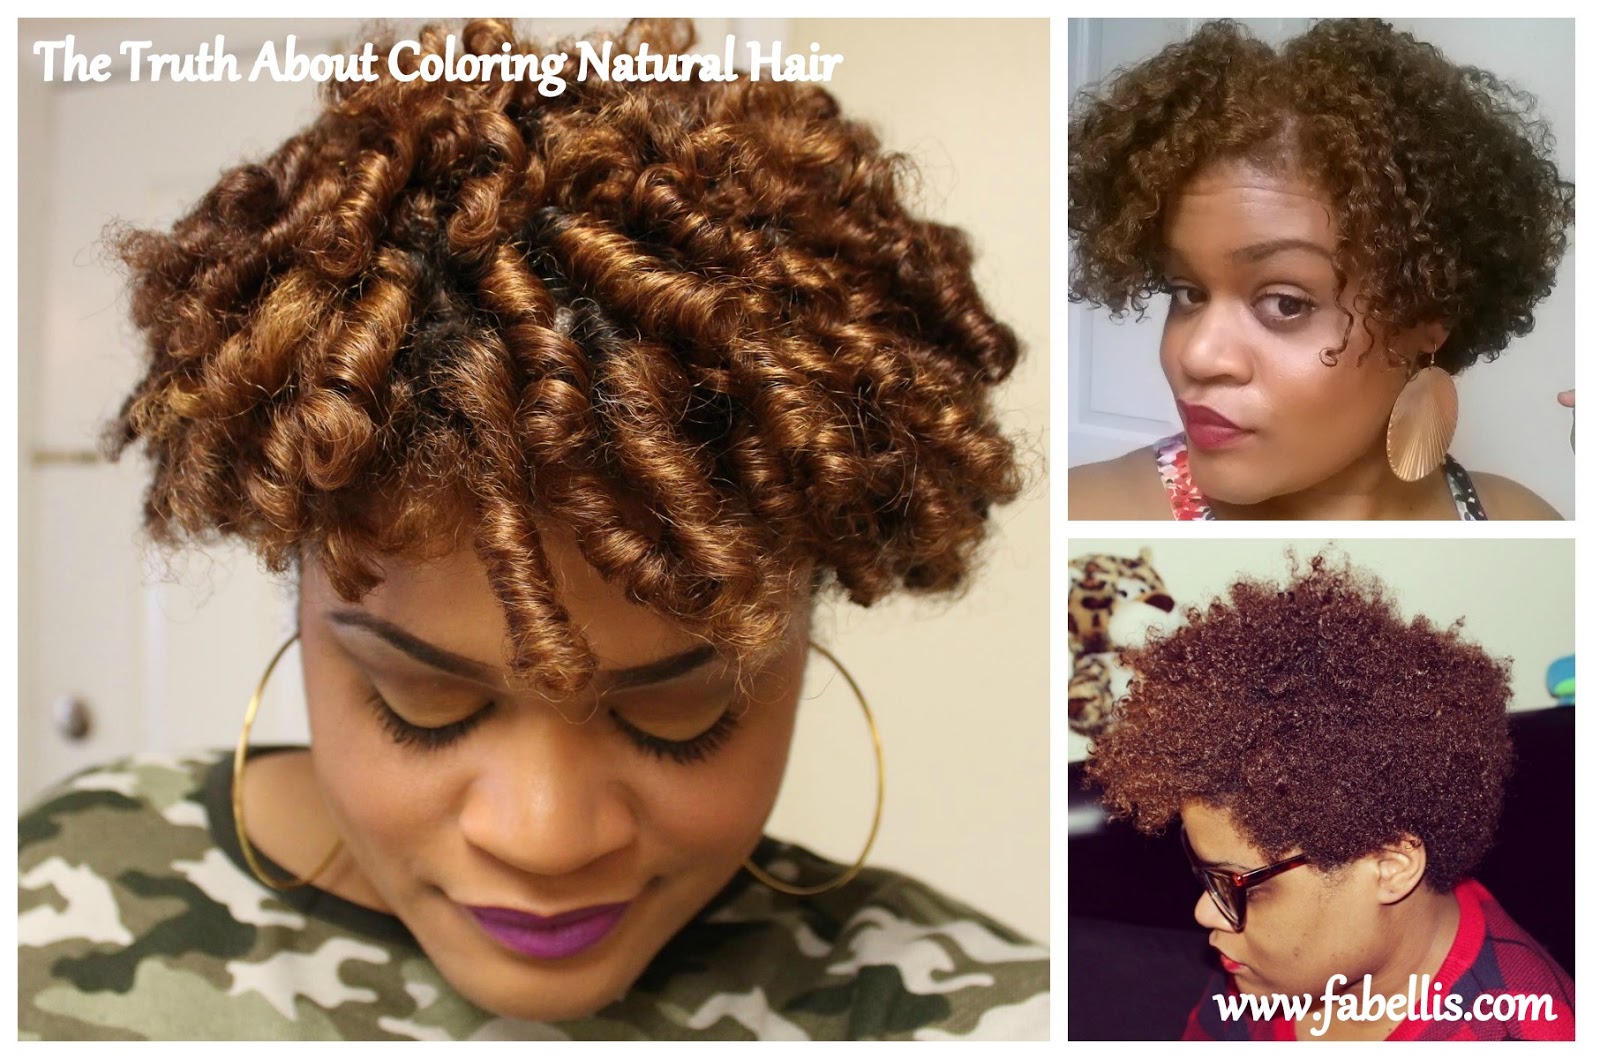 Natural Hair | The Truth About Coloring Natural Hair | FabEllis